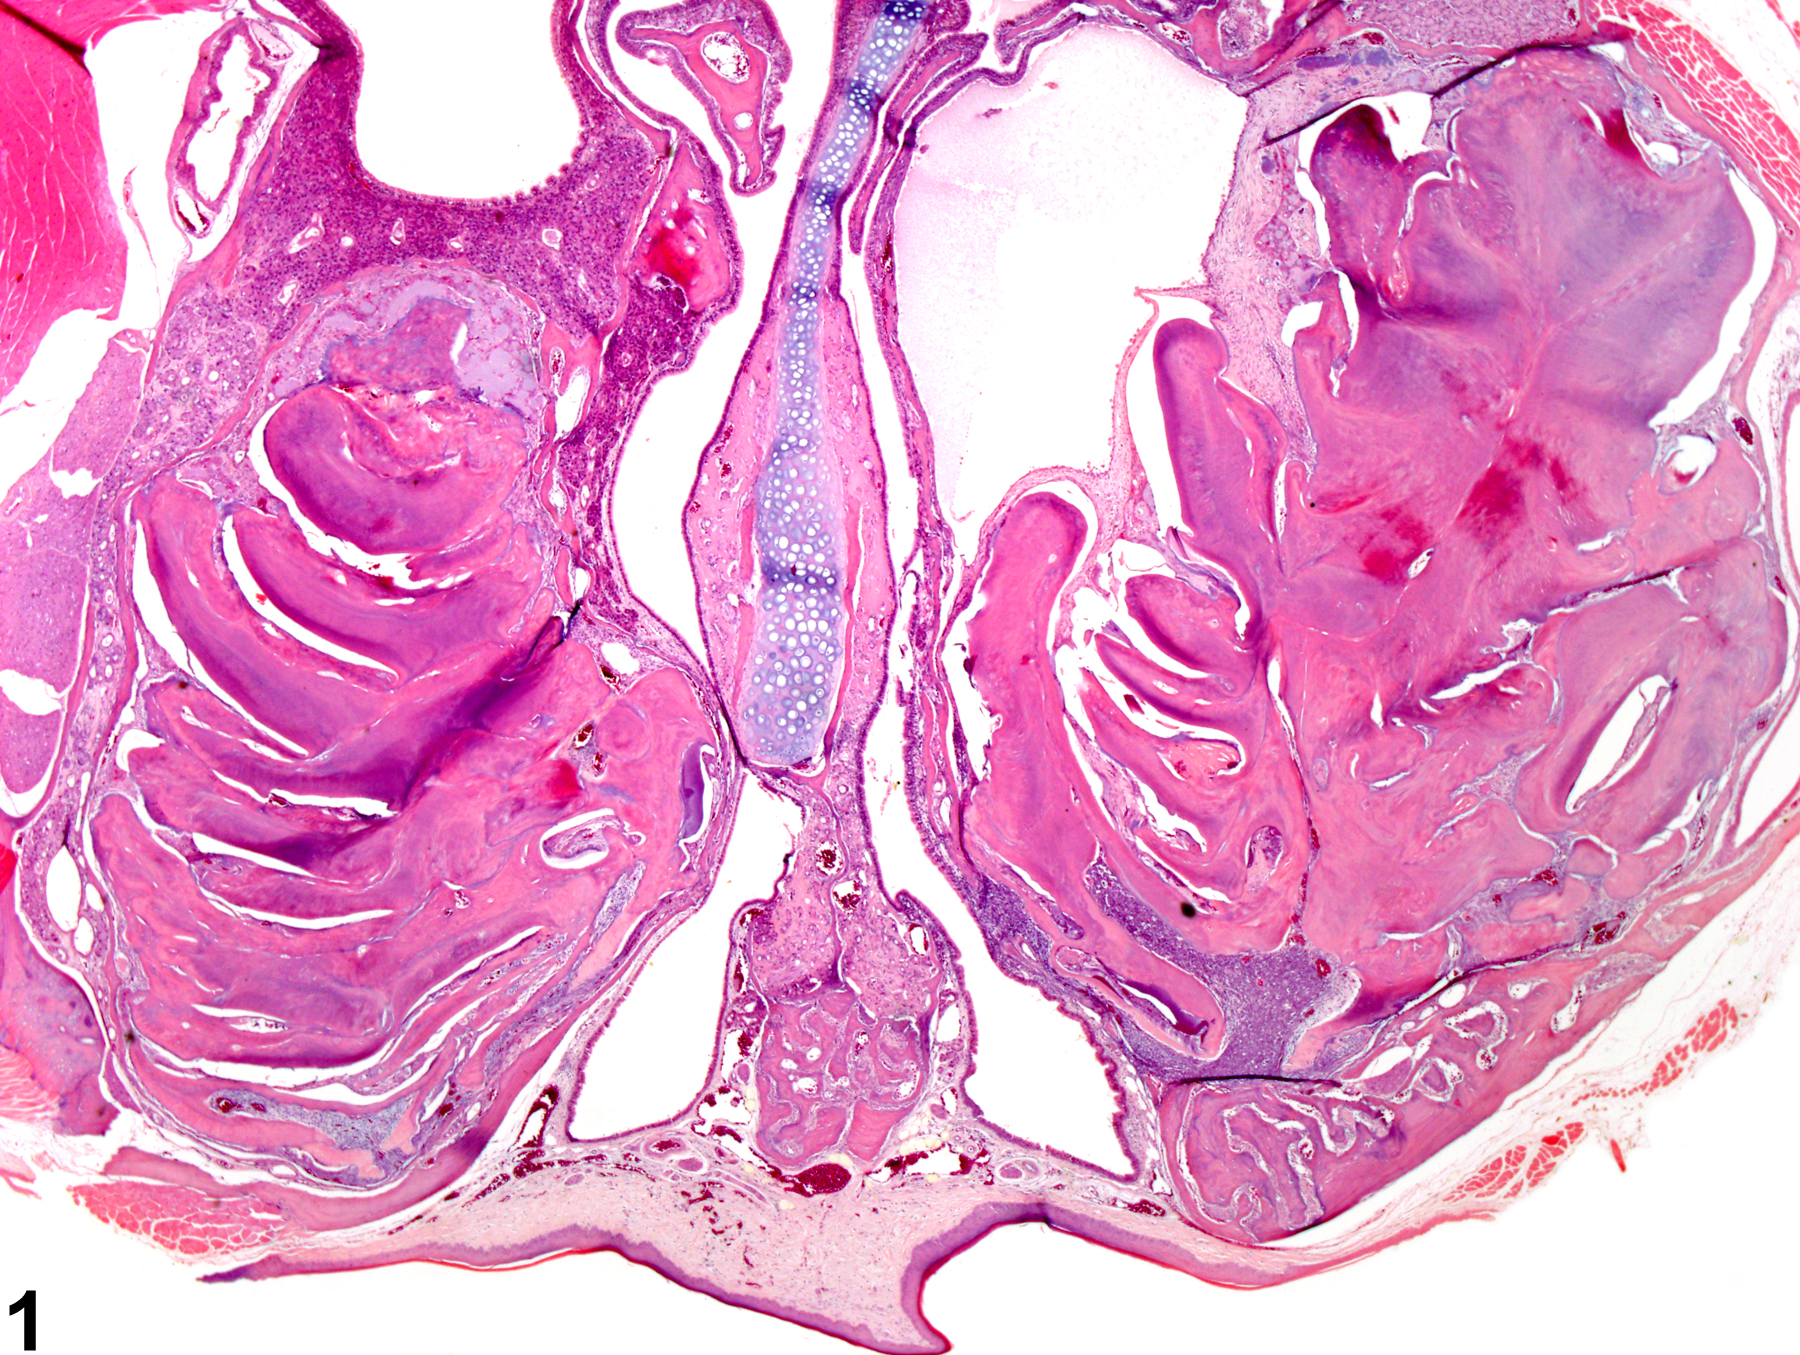 Image of dental dysplasia in the tooth from a male B6C3F1 mouse in a subchronic study